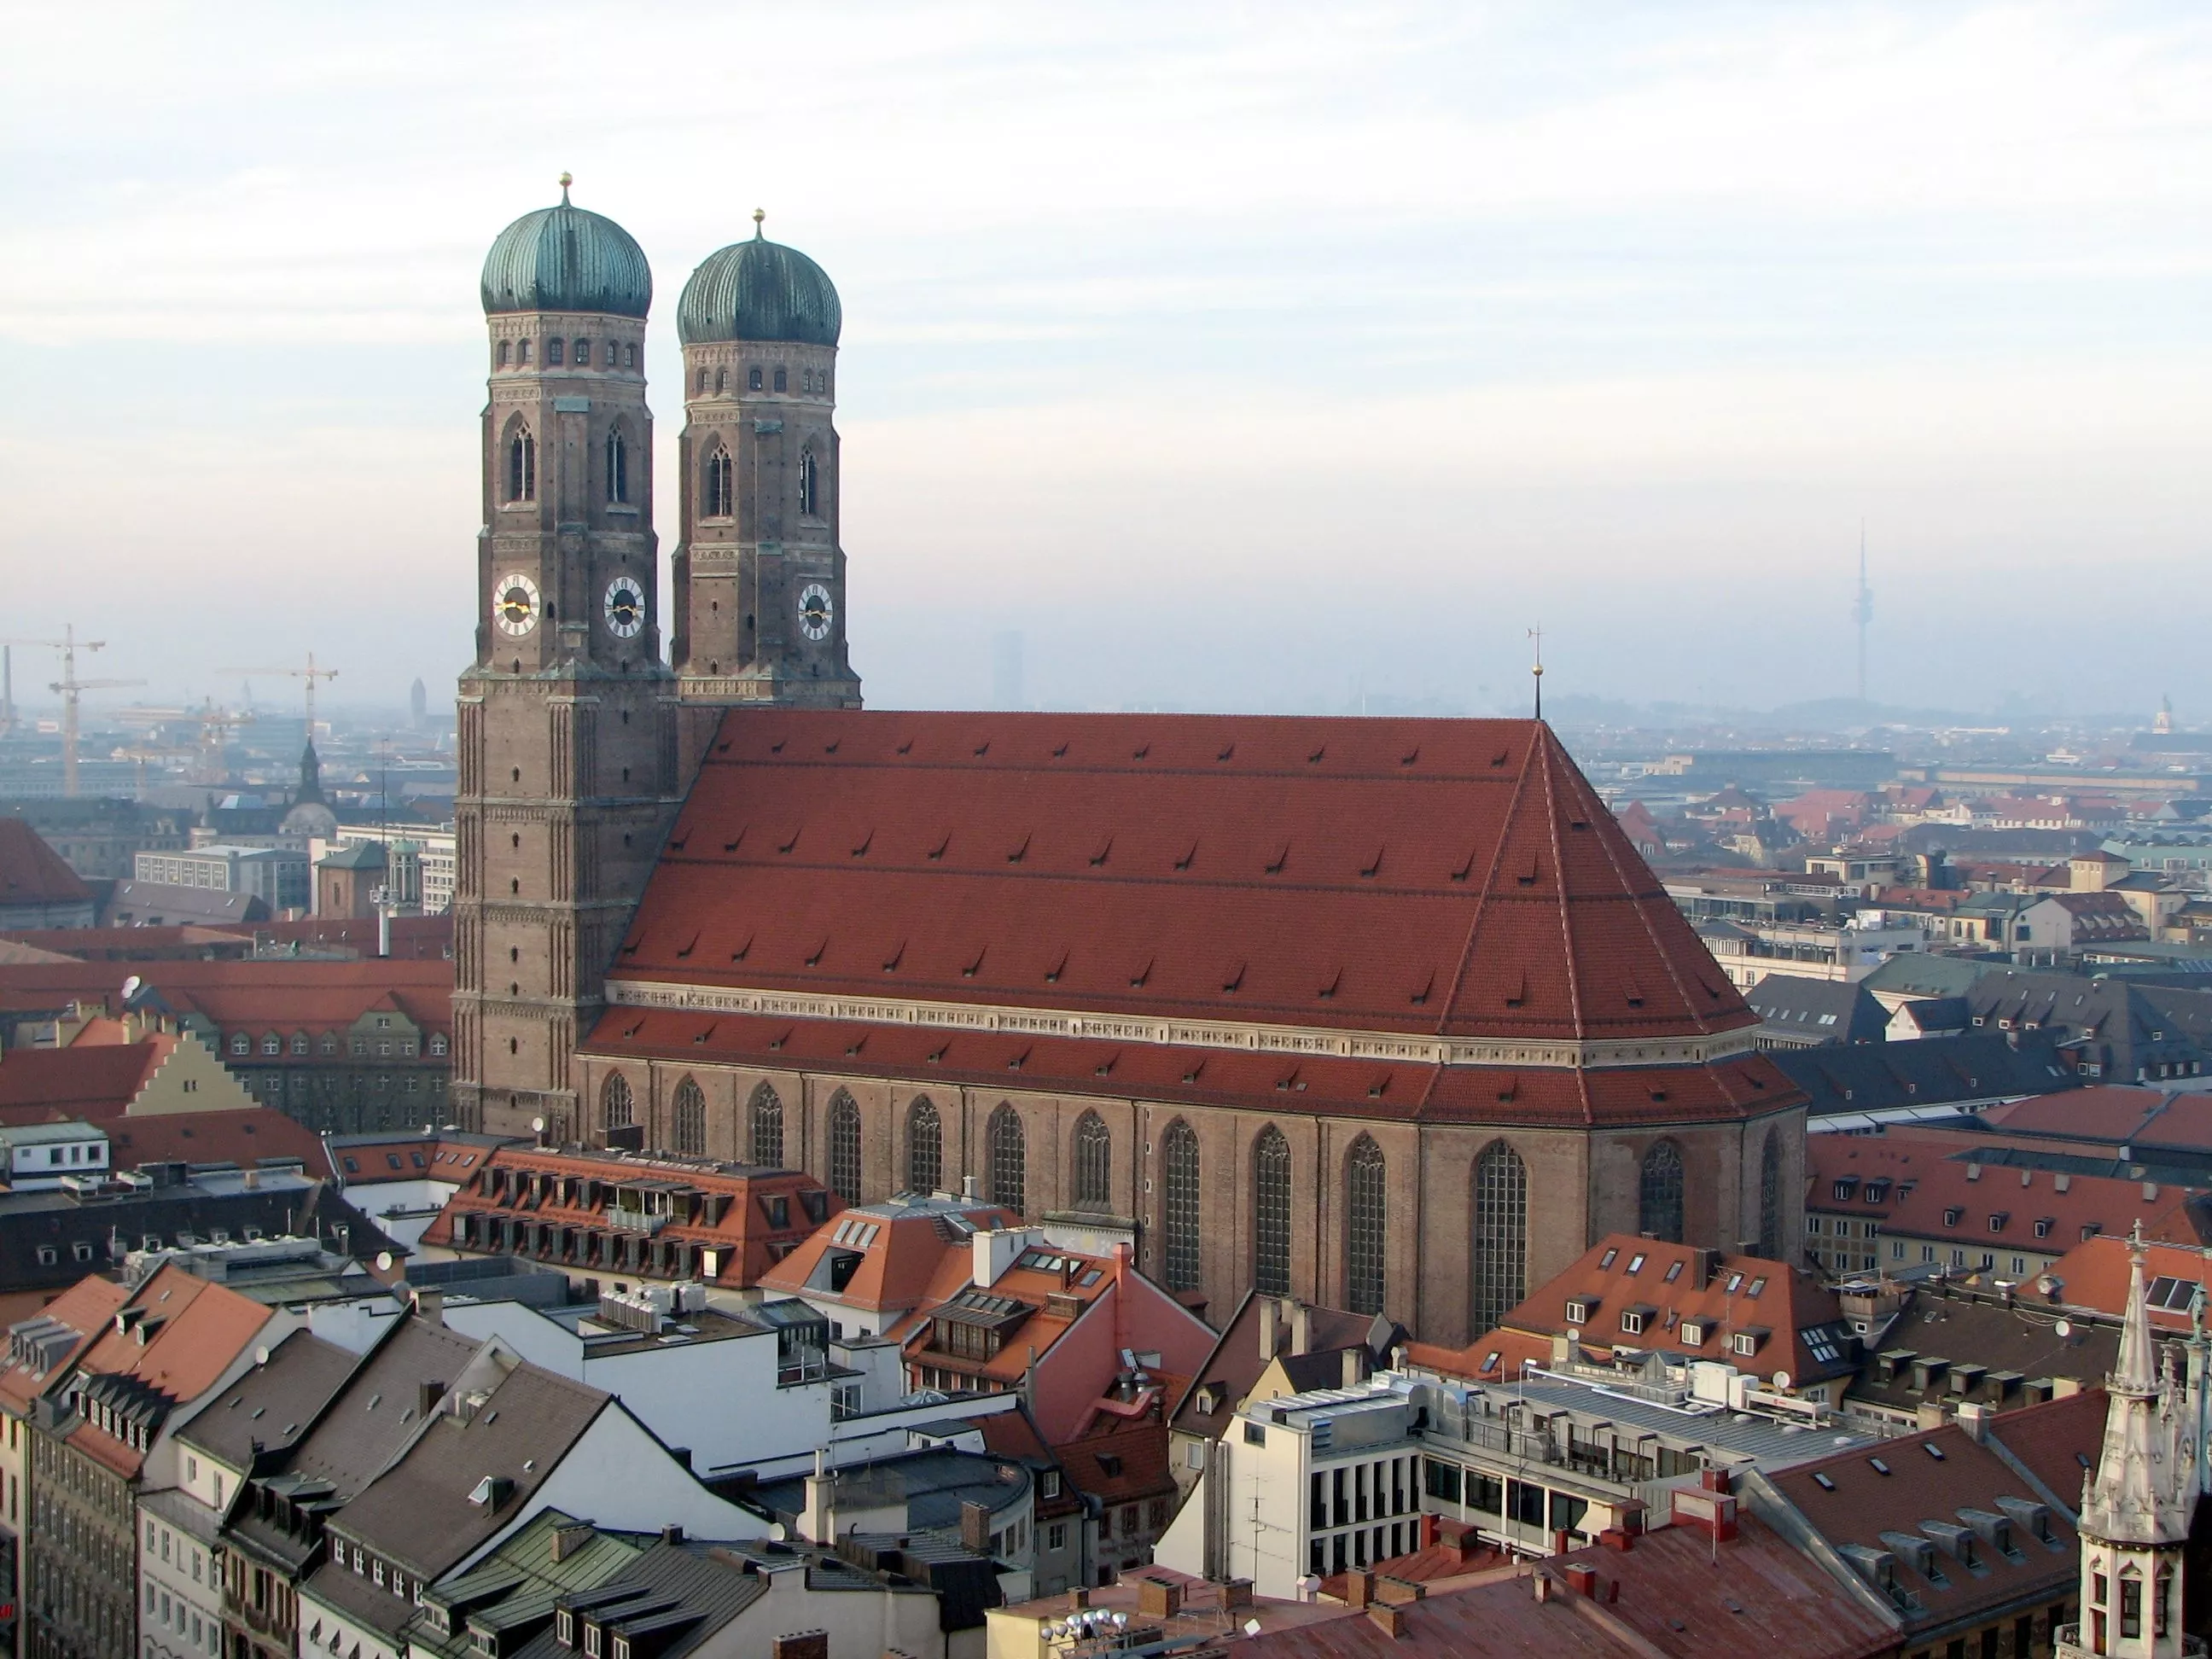 Frauenkirche in Germany, Europe | Architecture - Rated 3.8